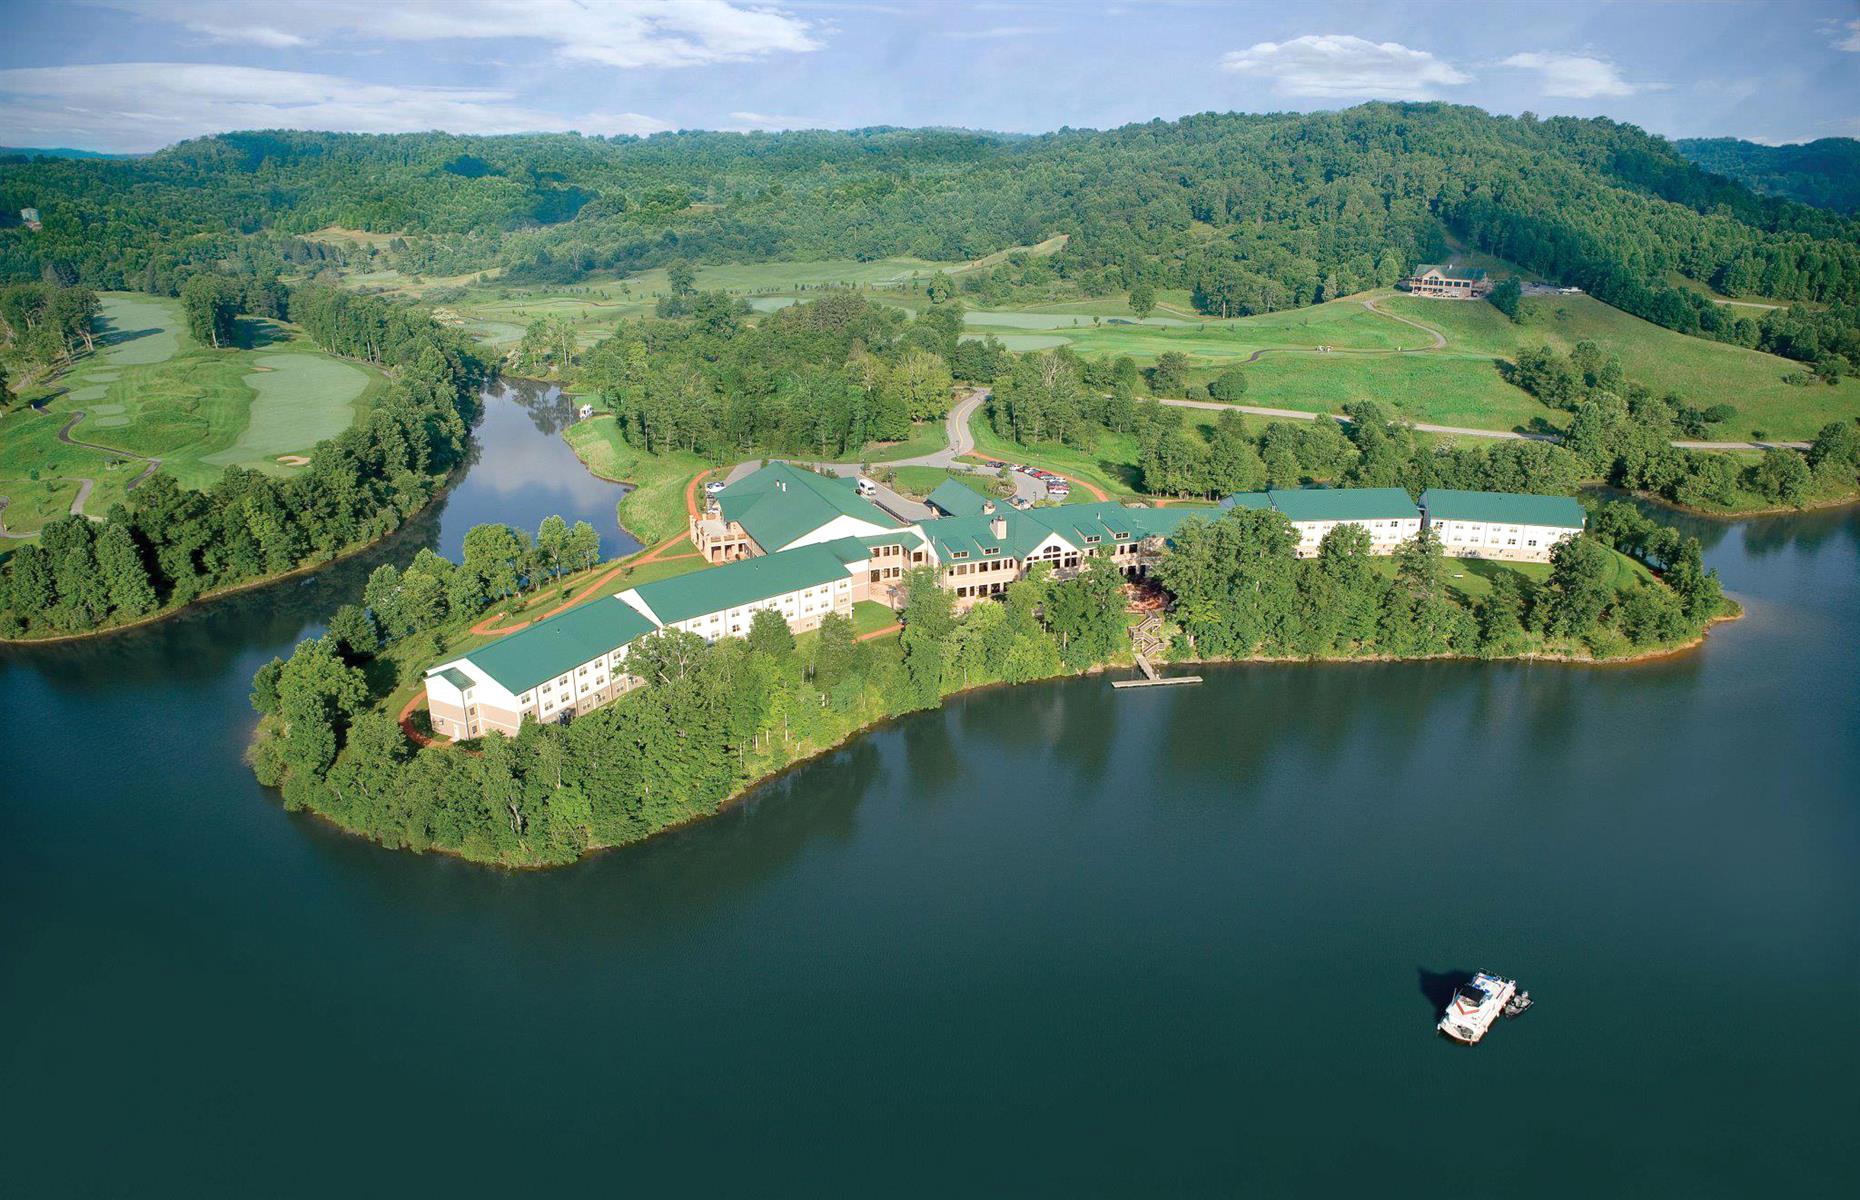 <p><a href="http://www.stonewallresort.com/west_virginia_resort/camping/">Stonewall Resort's campground</a> occupies a pretty spot along Stonewall Jackson Lake, with lots looking out onto the water and full hook-ups and Wi-Fi. The wider resort, meanwhile, has a golf course and a state-of-the-art spa (both now open) and outdoor and indoor pools (operating at a limited capacity). Kayaks, canoes and stand-up paddle boards are available to rent too, and there are mooring posts if you're lucky enough to have your own boat.</p>